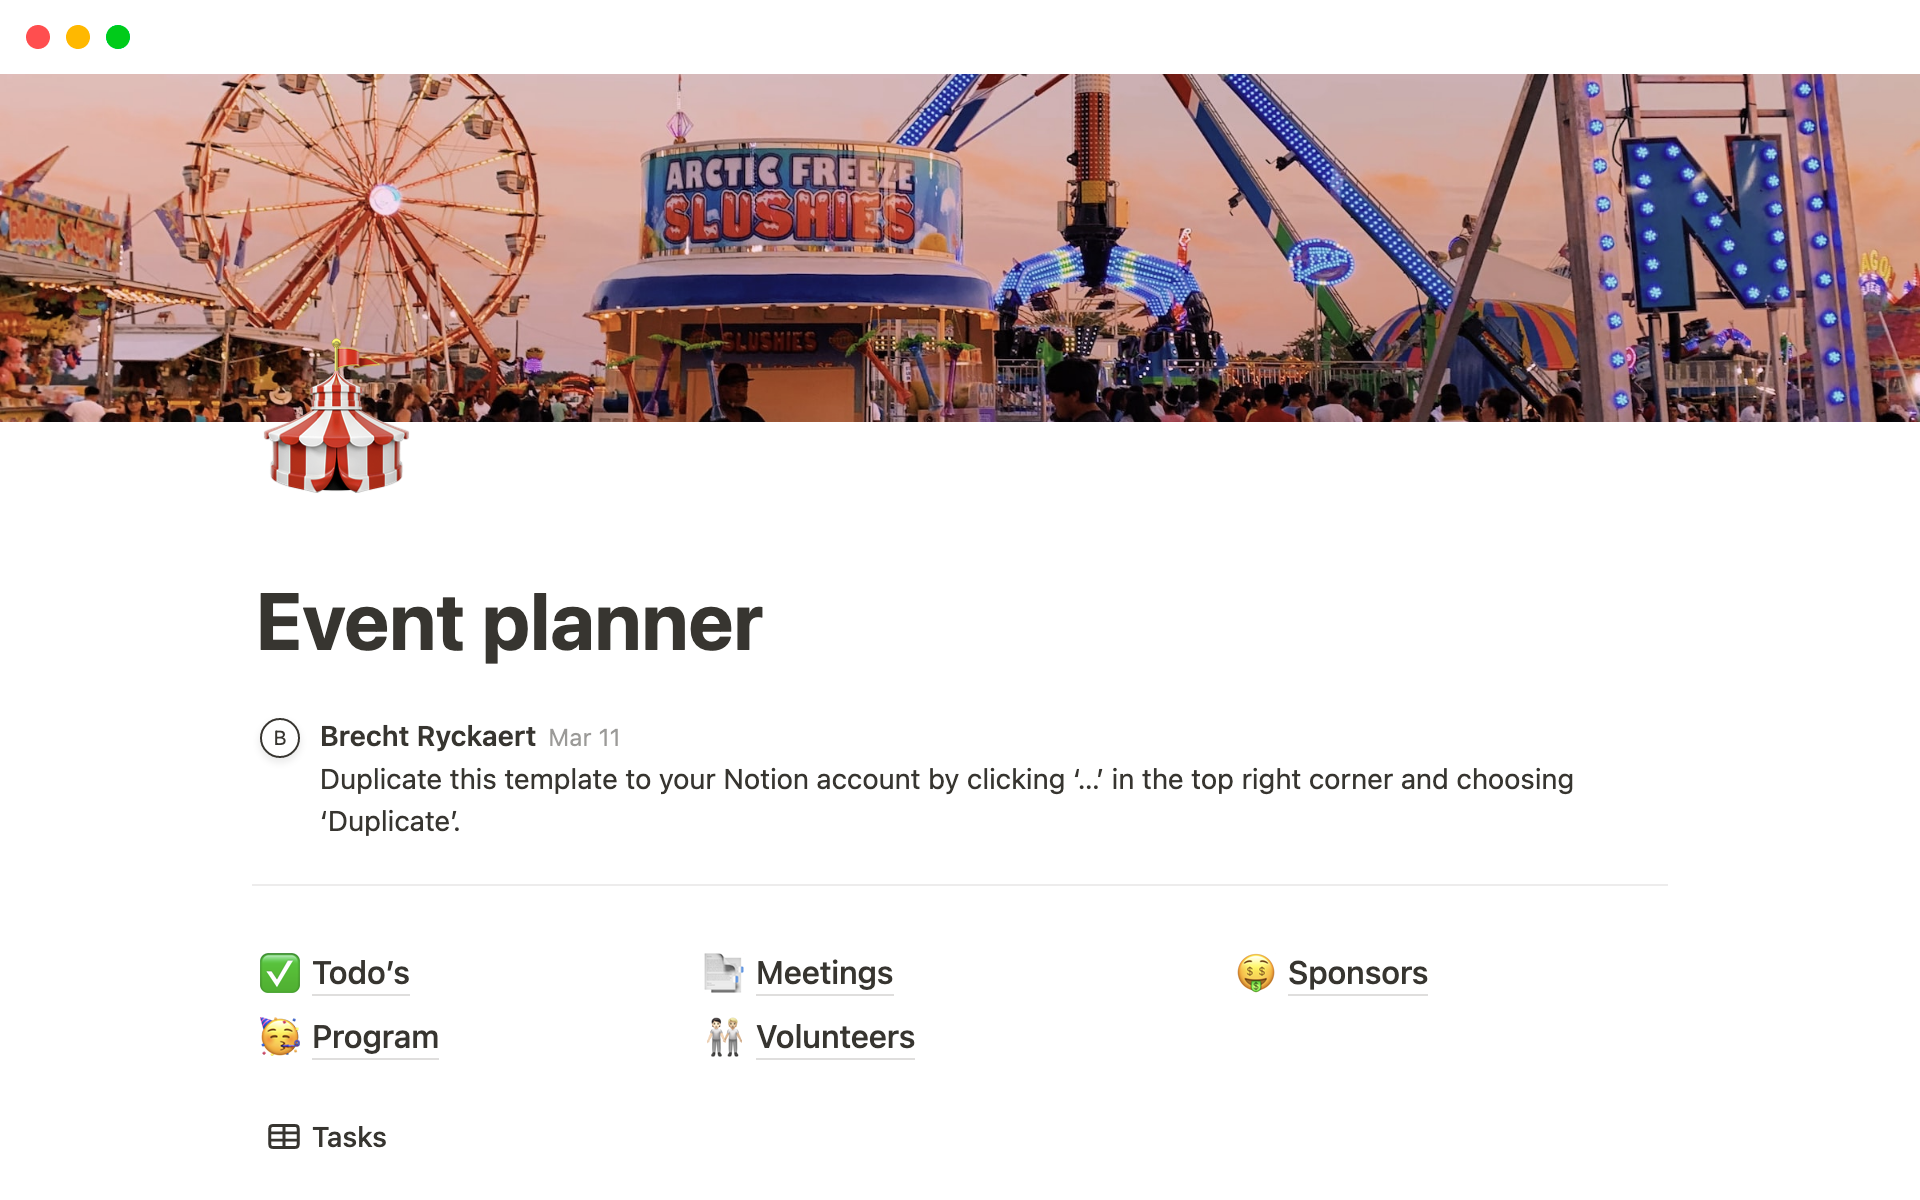 Event Planner is a dashboard for event planning, containing sponsorship and volunteer management, event planning schedule, task management and meeting notes.